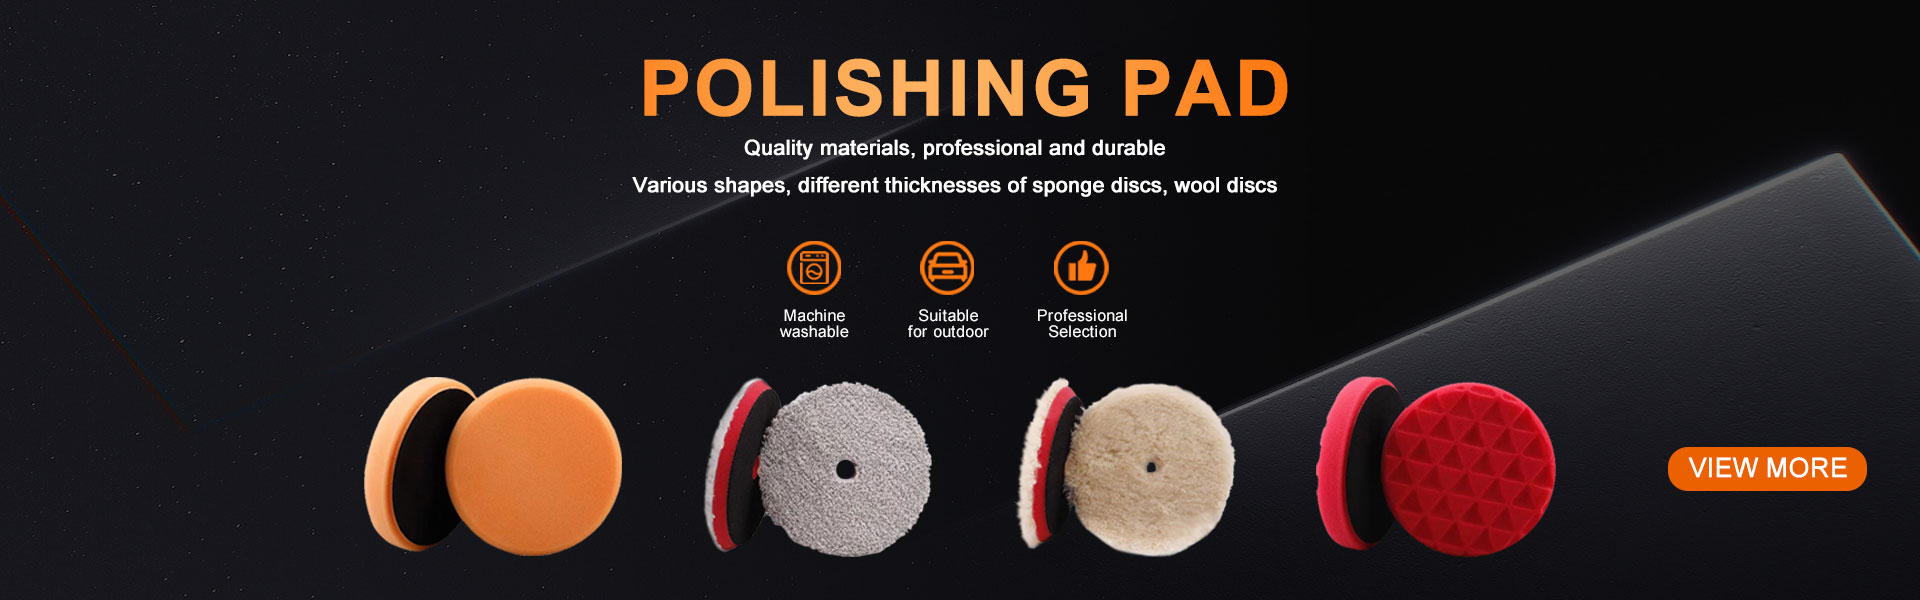 buffing pad manufacture